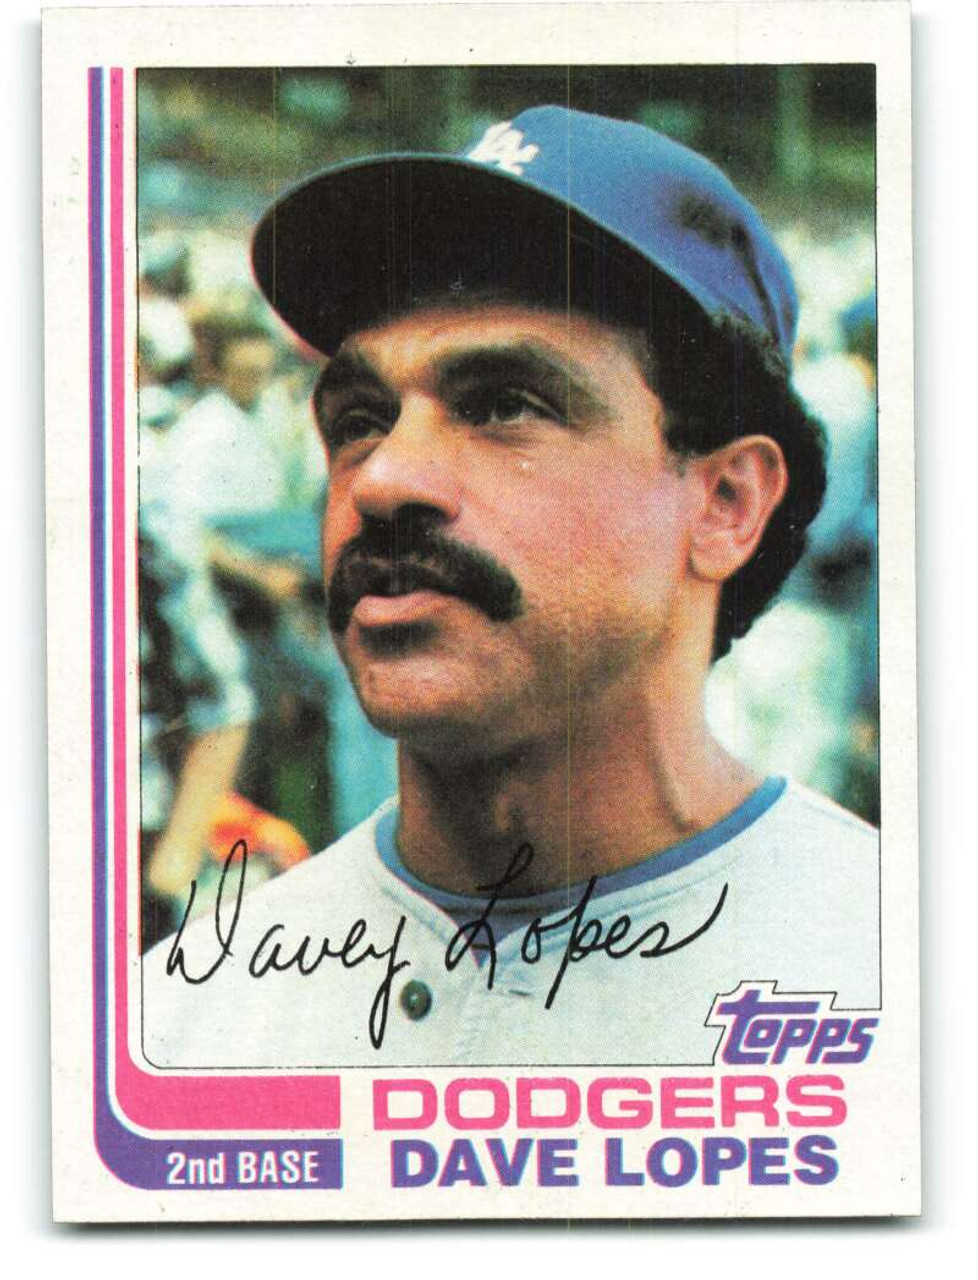 1982 Topps #740 Davey Lopes VG Los Angeles Dodgers - Under the